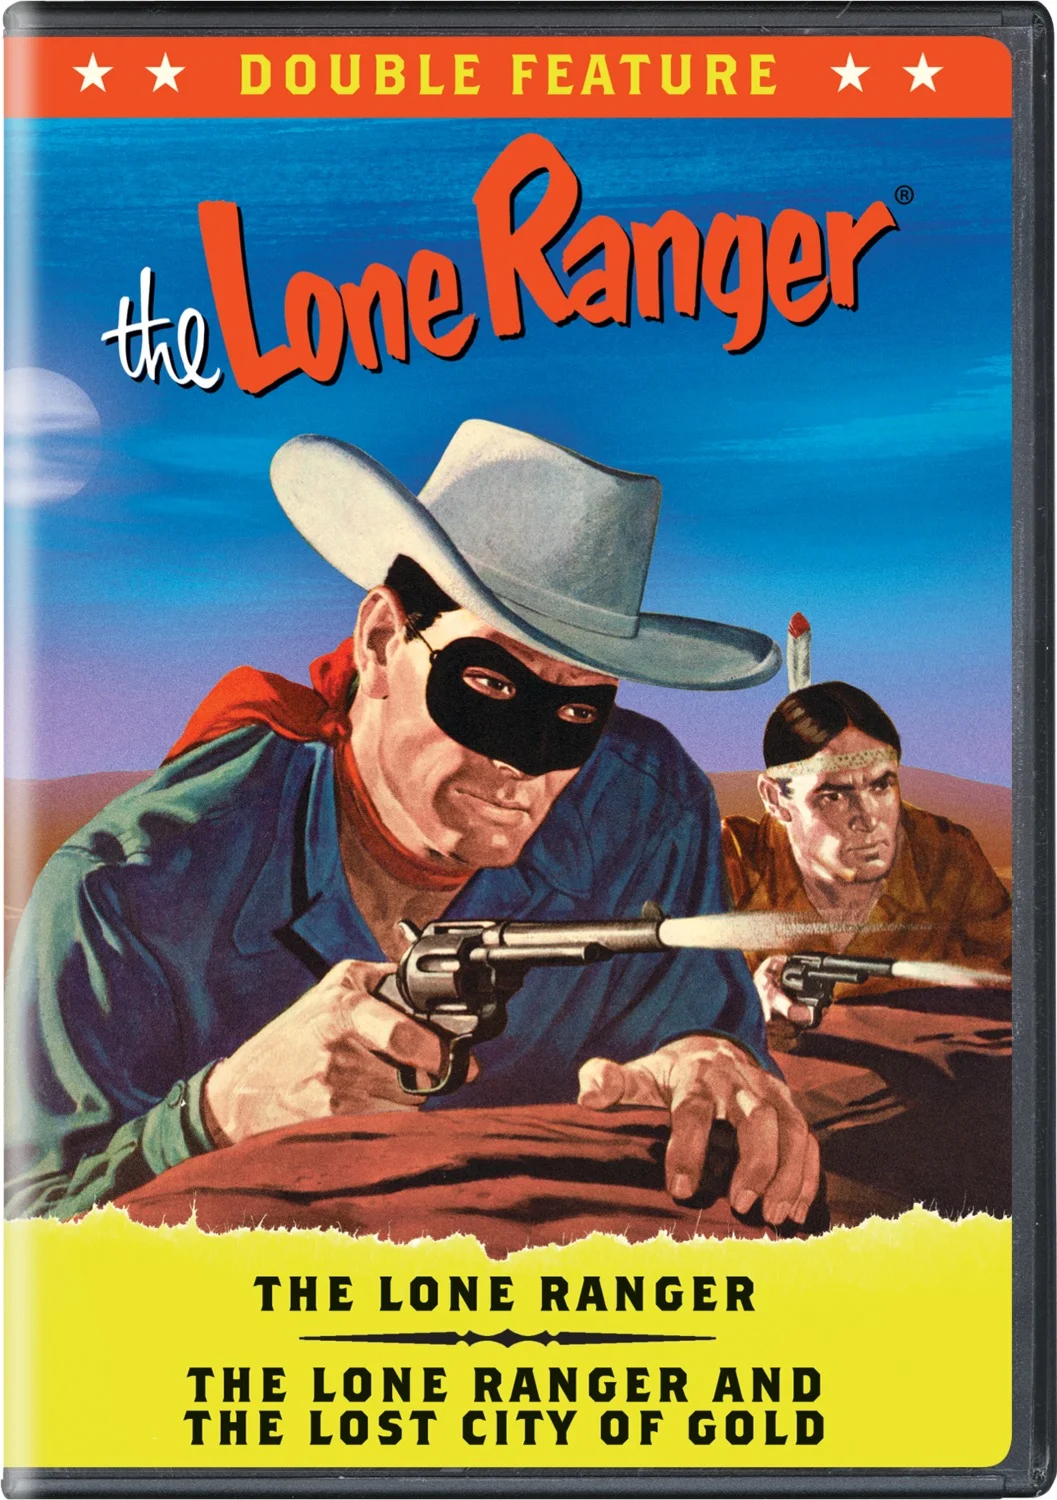 Lone Ranger, The/Lone Ranger and the Lost City of Gold, The (DVD)